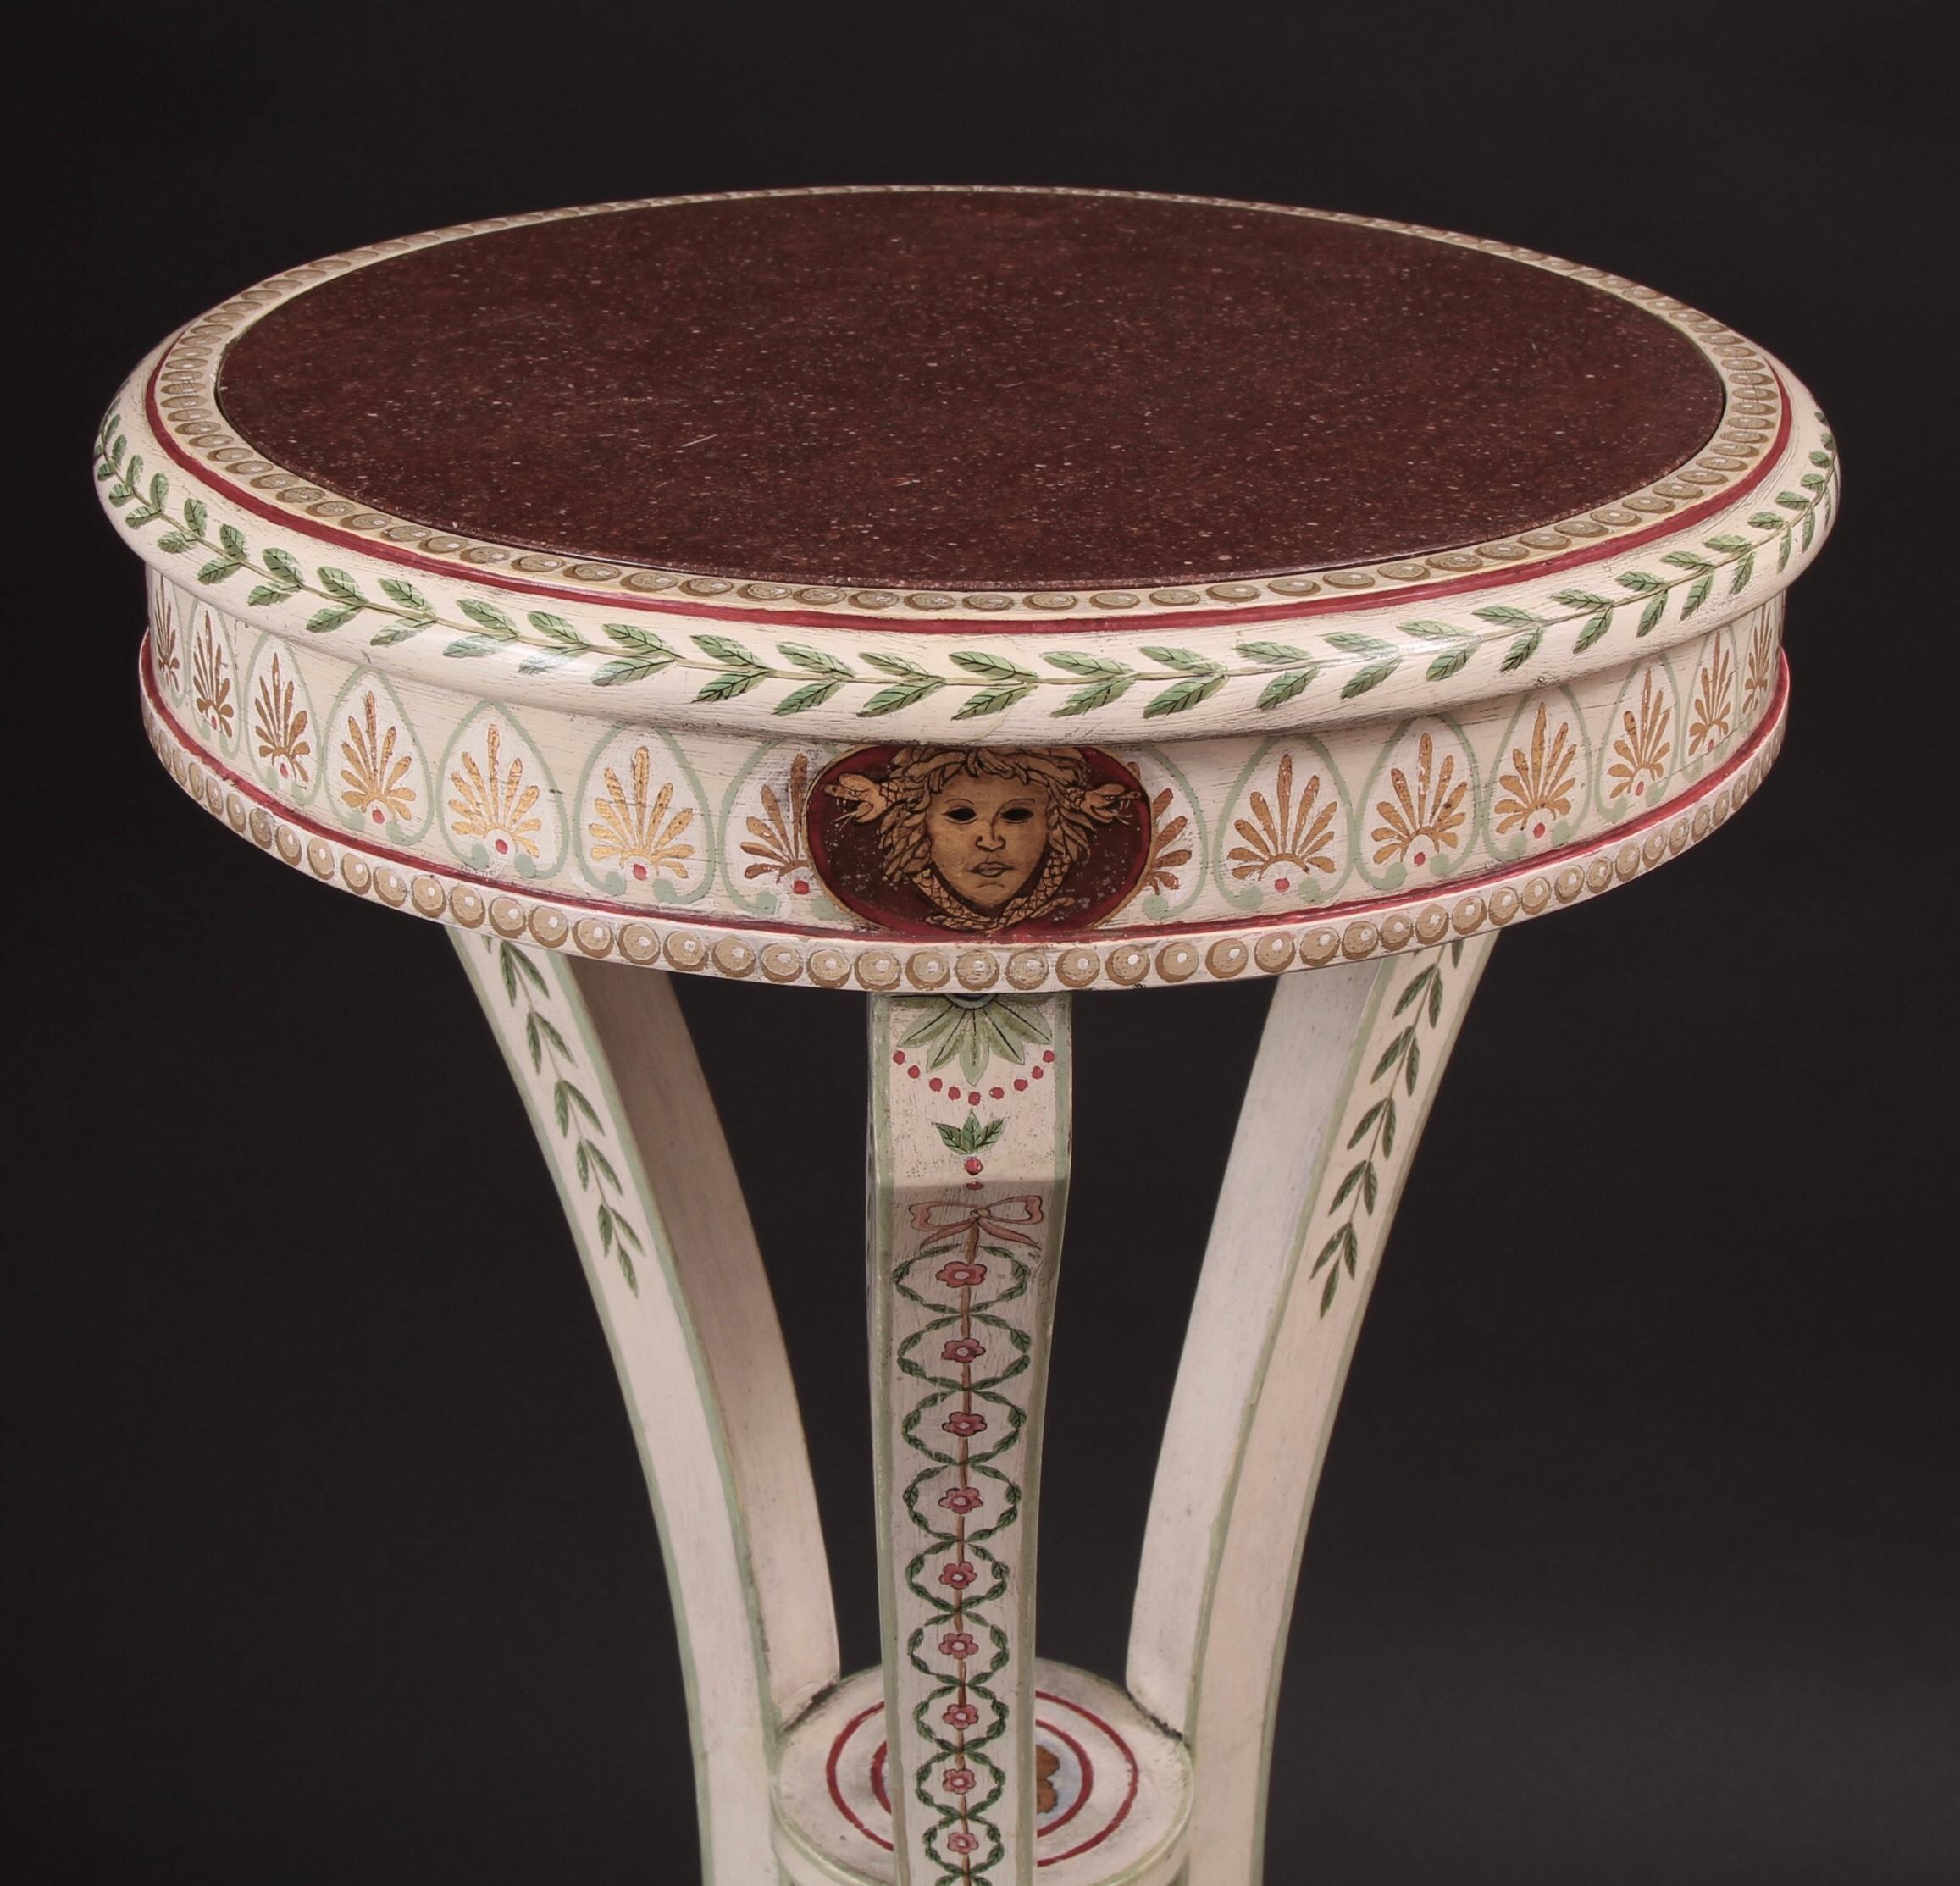 Fine pair of 19th century Etruscan neoclassical painted parcel-gilt pedestals in the manner of Robert Adam. This refined pair incorporate the most exceptional & beautiful neoclassical design throughout. The circular top is inset with the rare stone